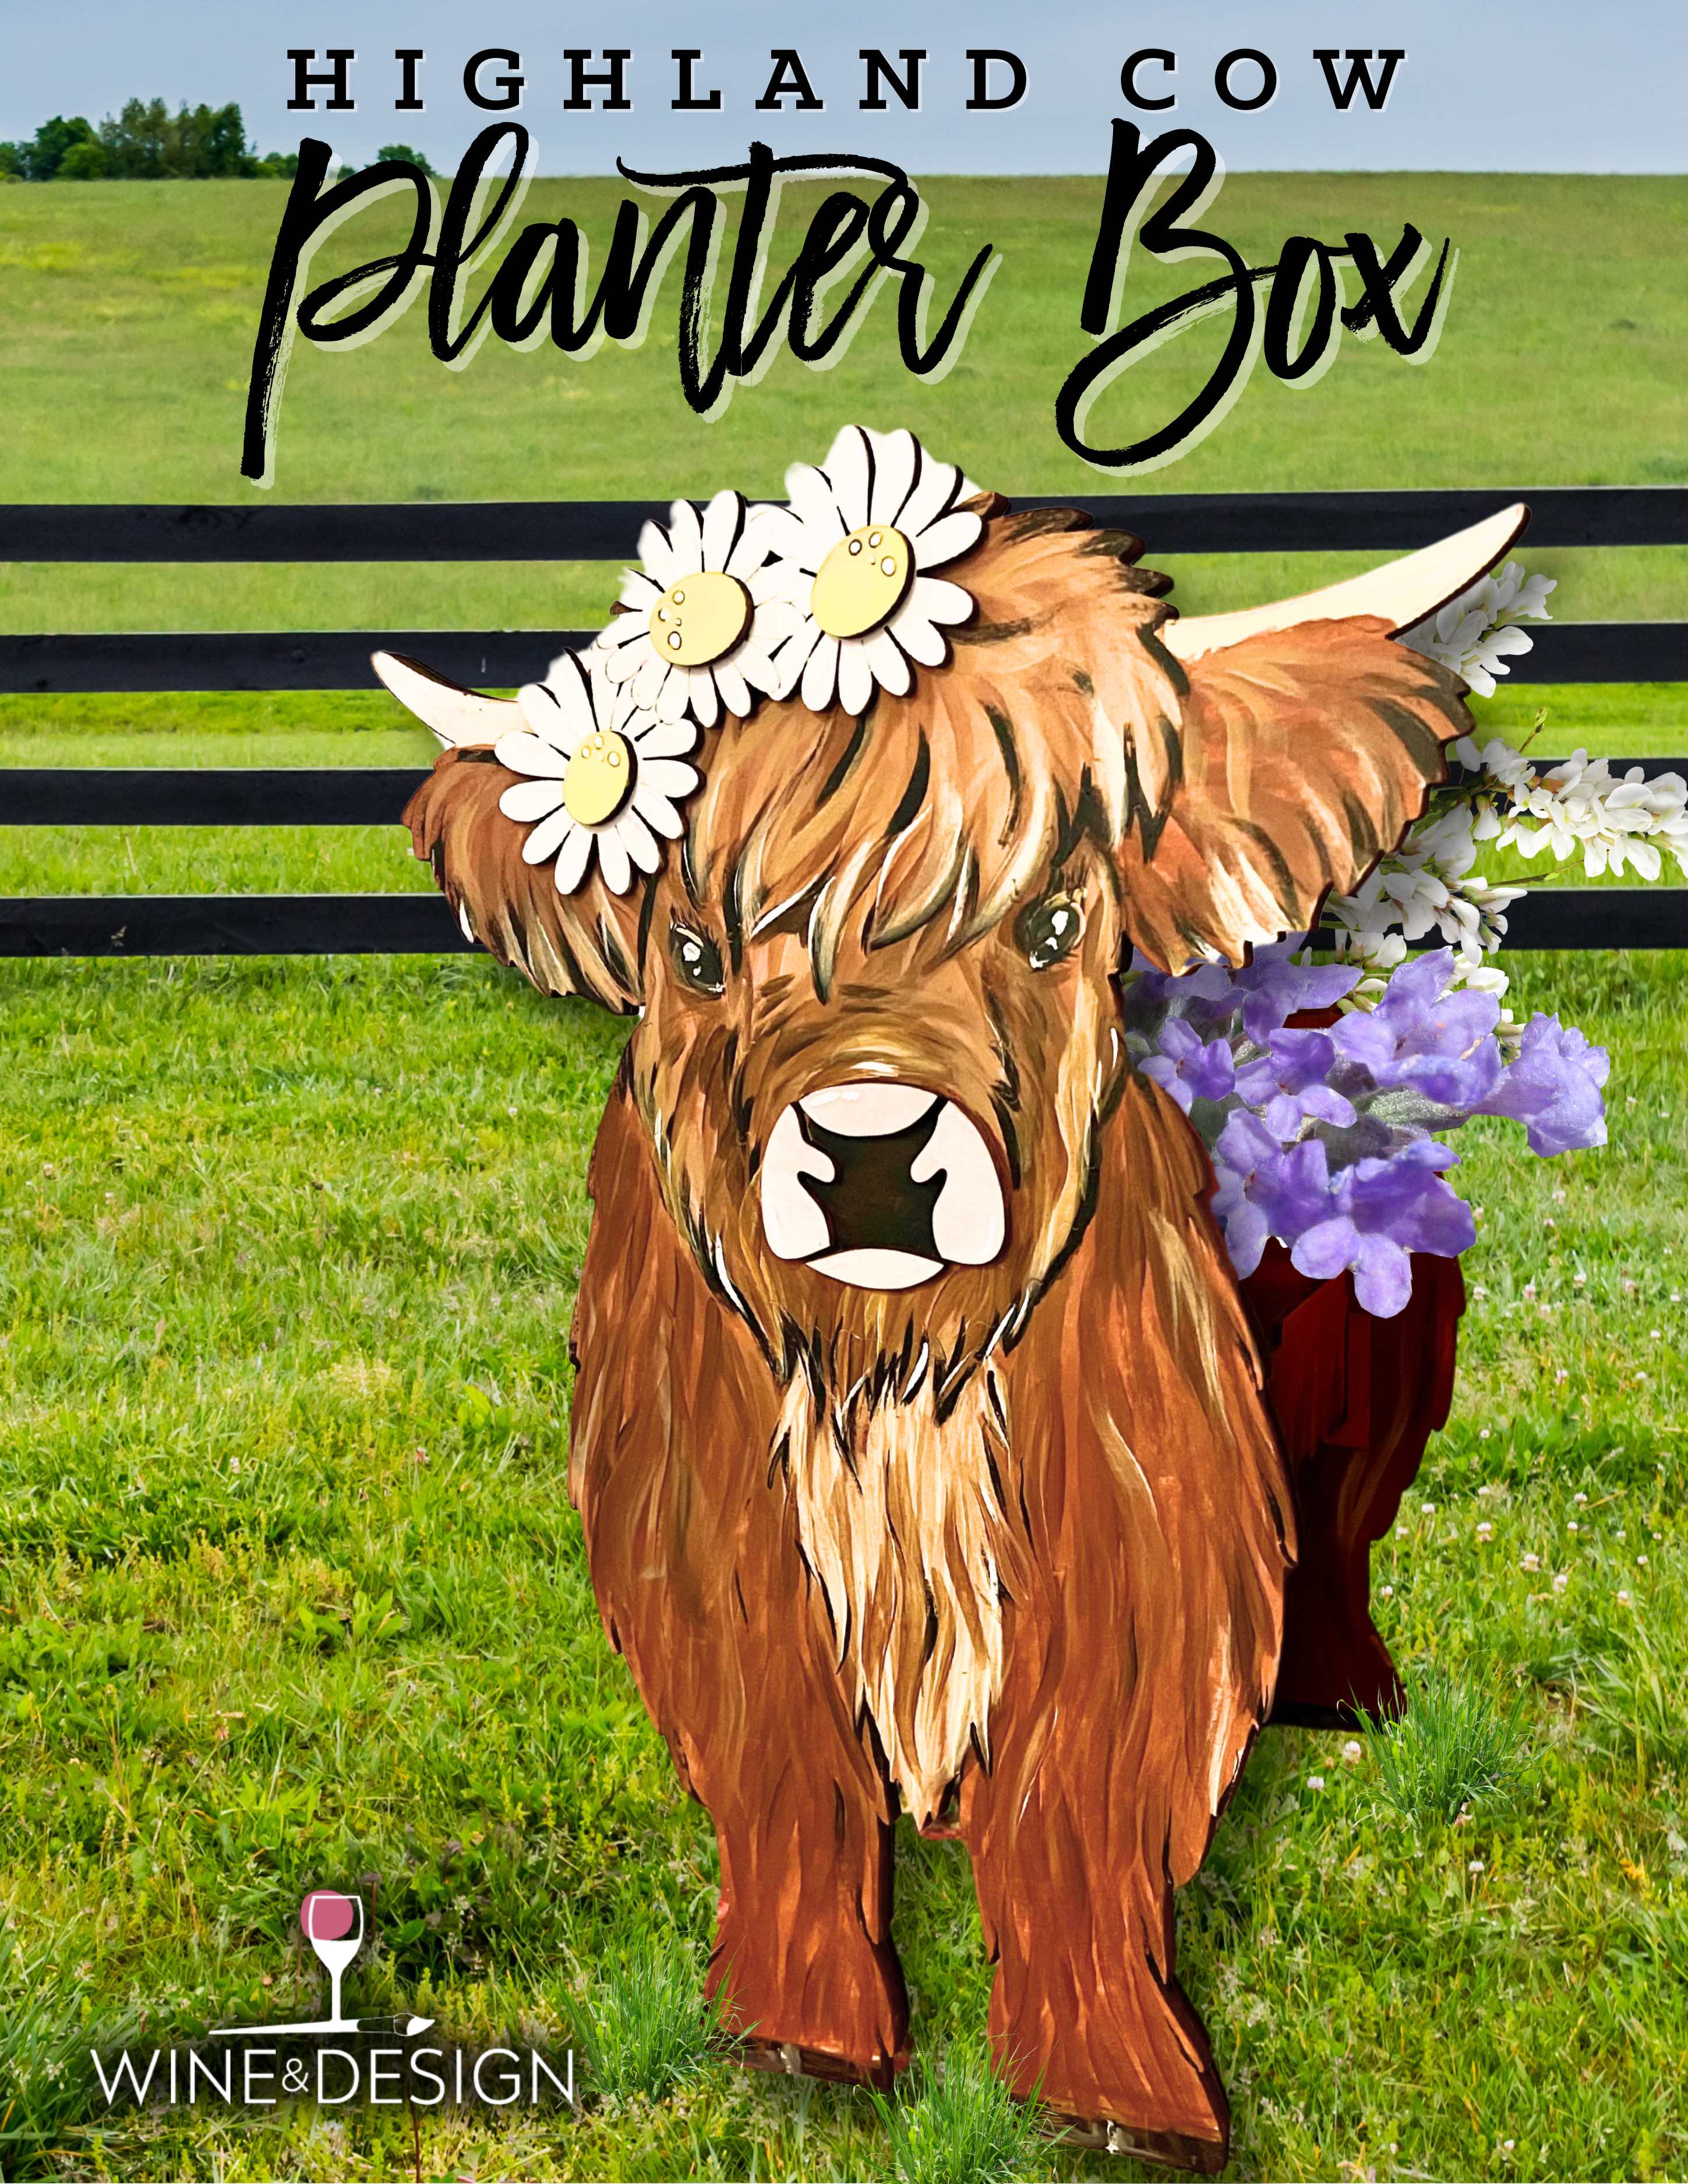 Wooden Highland Cow Planter at Crooked Creek Highlands (Event Address: 4147 Somers Road, Hamptonville, NC 27020)